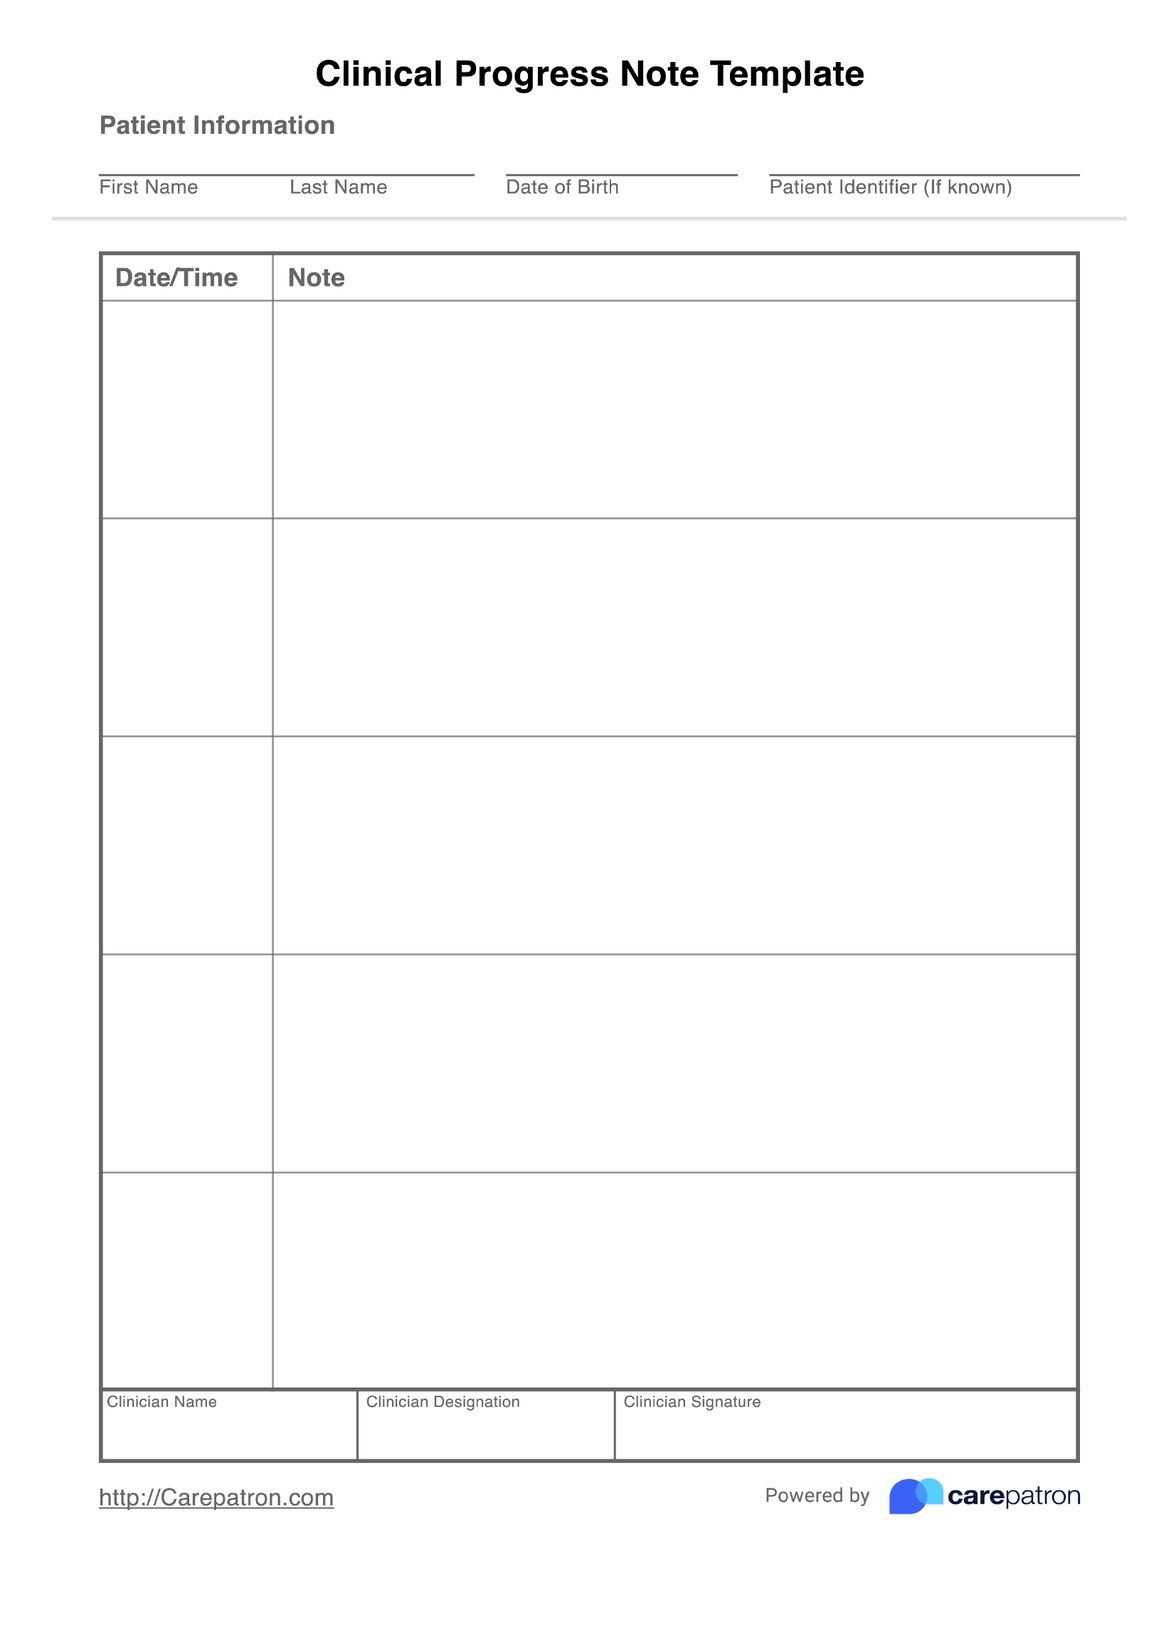 Clinical Progress Notes Template PDF Example